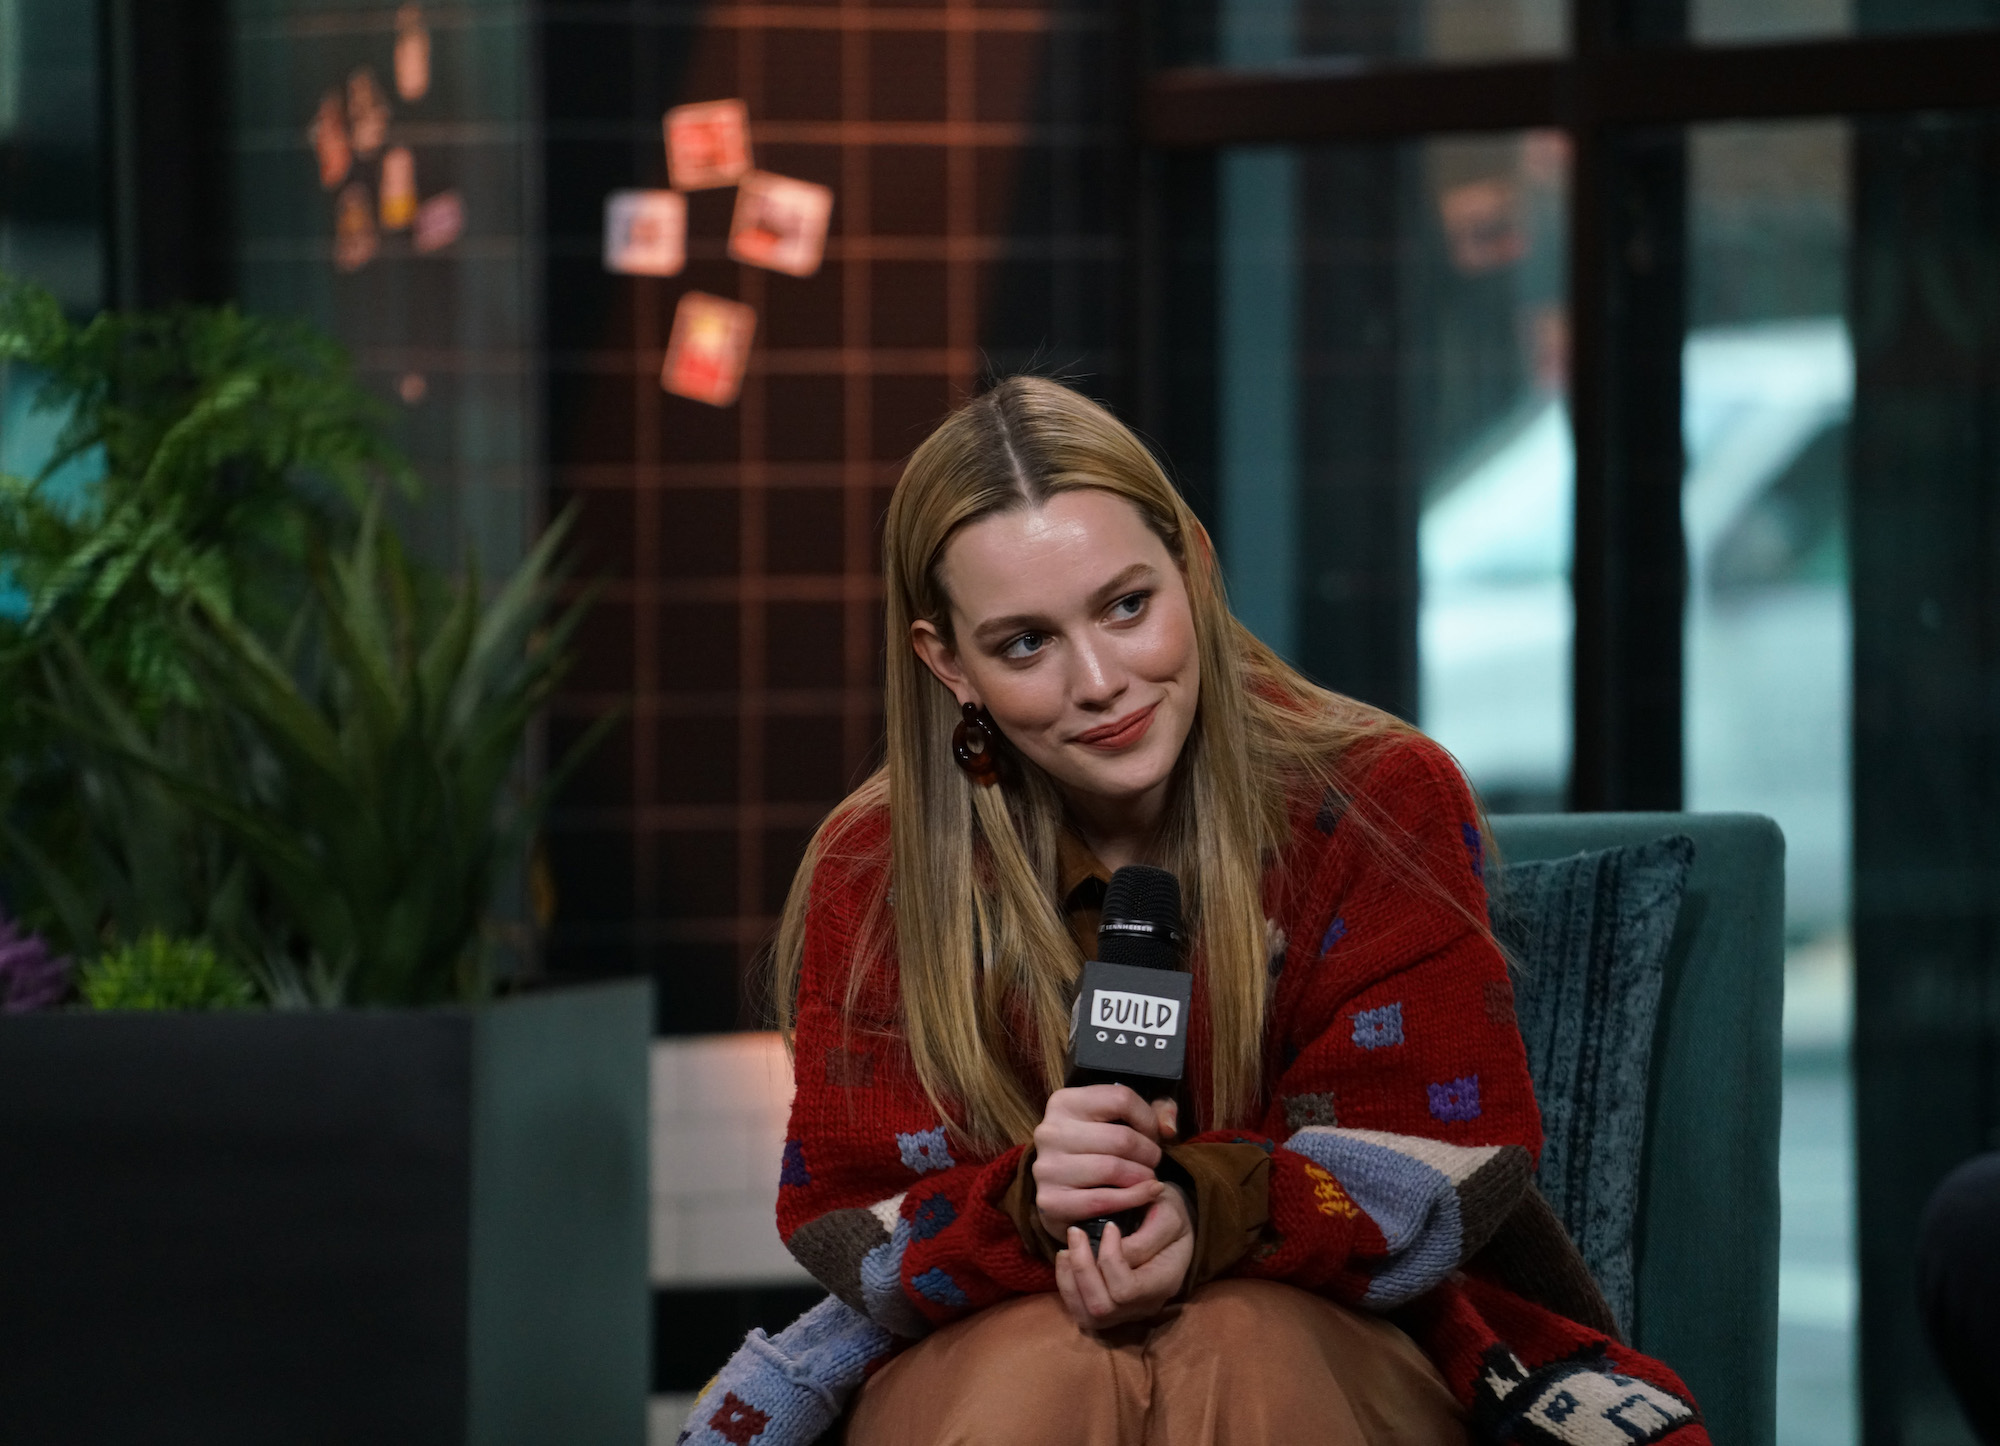 Victoria Pedretti at the Build Series to discuss her role on the new series 'You' on Jan. 07, 2020